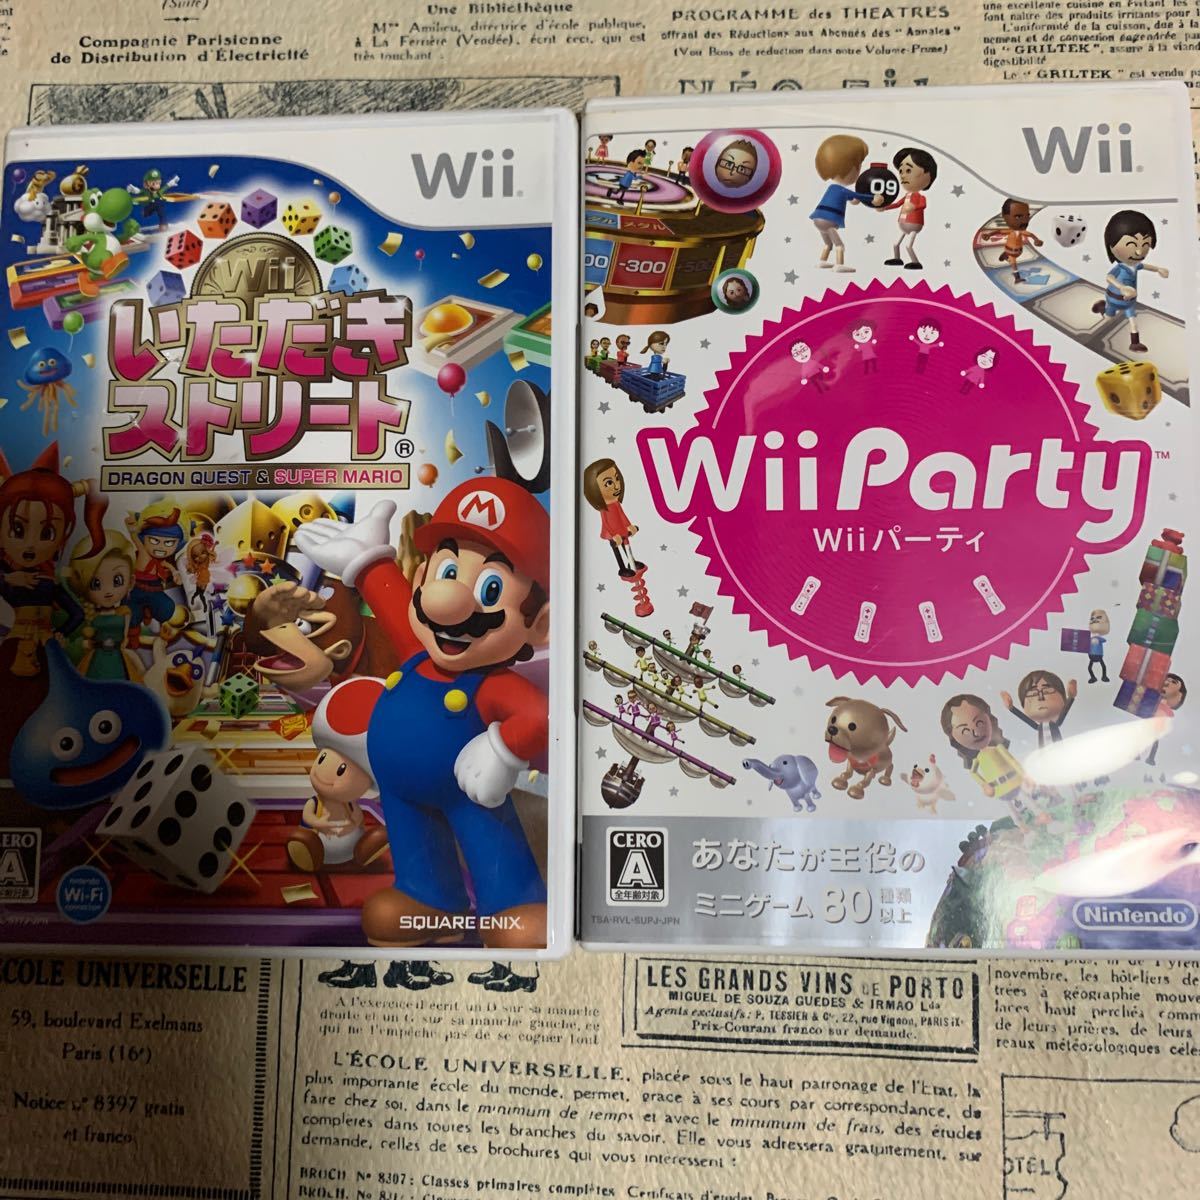 【Wii】 いただきストリートWii、Wiiパーティ